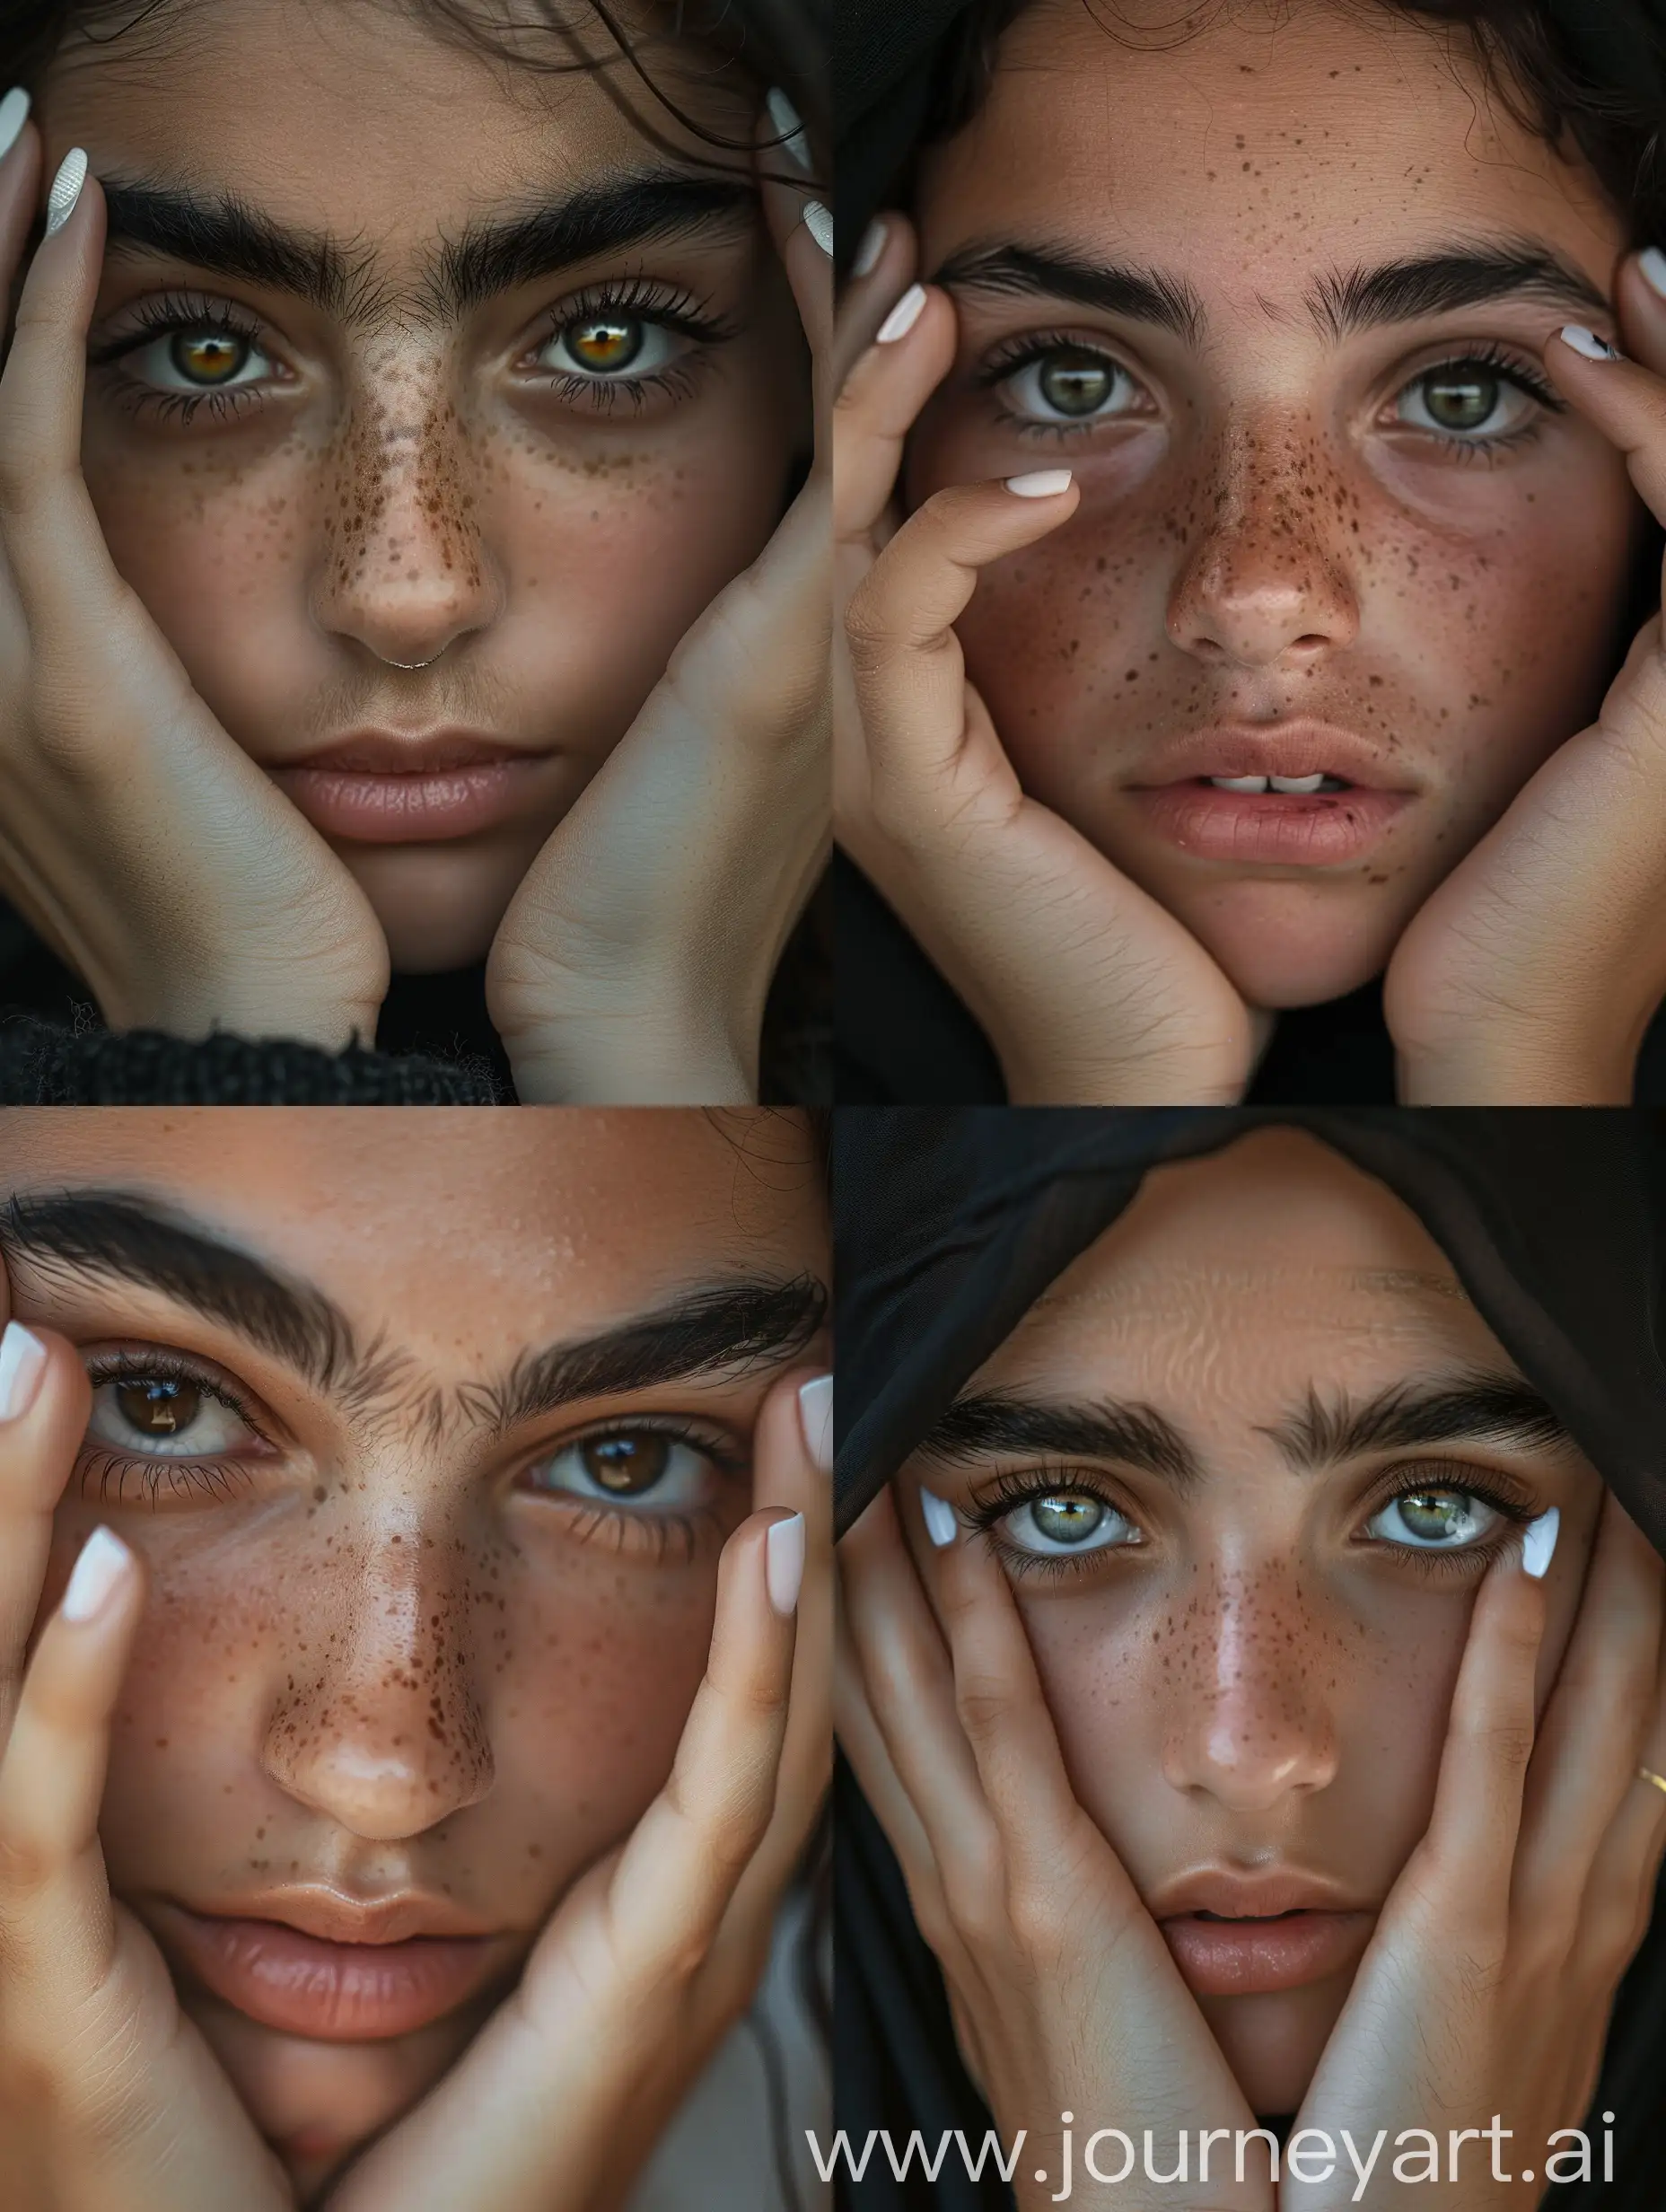 Photograph: Professional portrait of a Palestinian 15 year old girl, bushy eyebrows, somber look, broad and big nose, top model, hands cover part of face, white gel nail polish